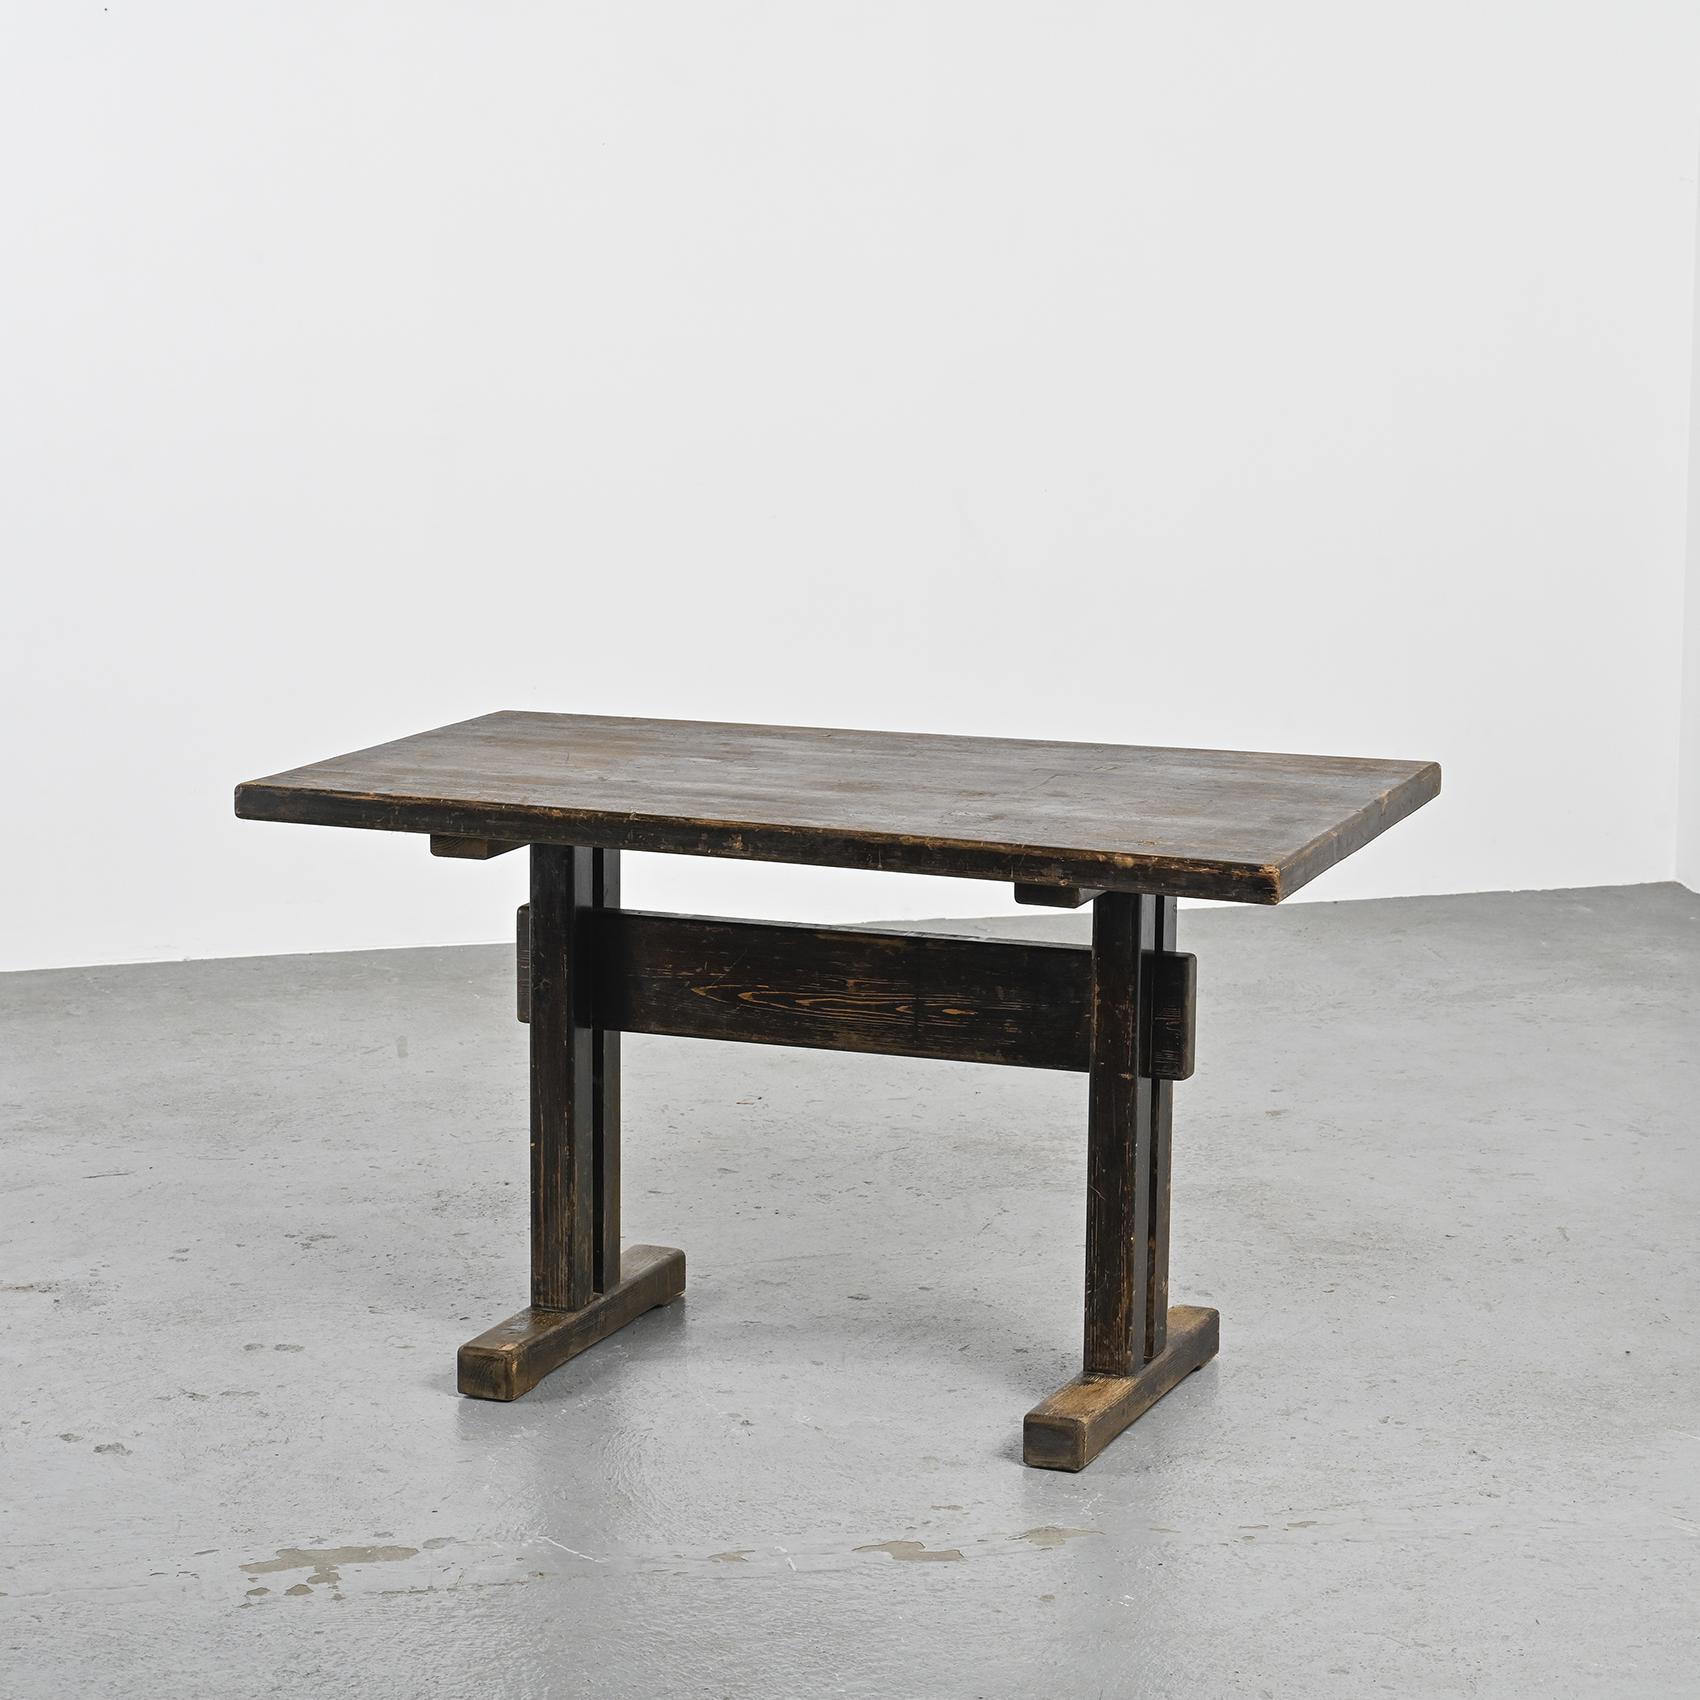 
Rectangular tabletop and braced base table, rare version with wedge mounting, selected for the Les Arcs ski resort, entirely made of dark stained solid pine.

Passionate about mountains, Charlotte Perriand worked during 20 years (1967-1989) on the